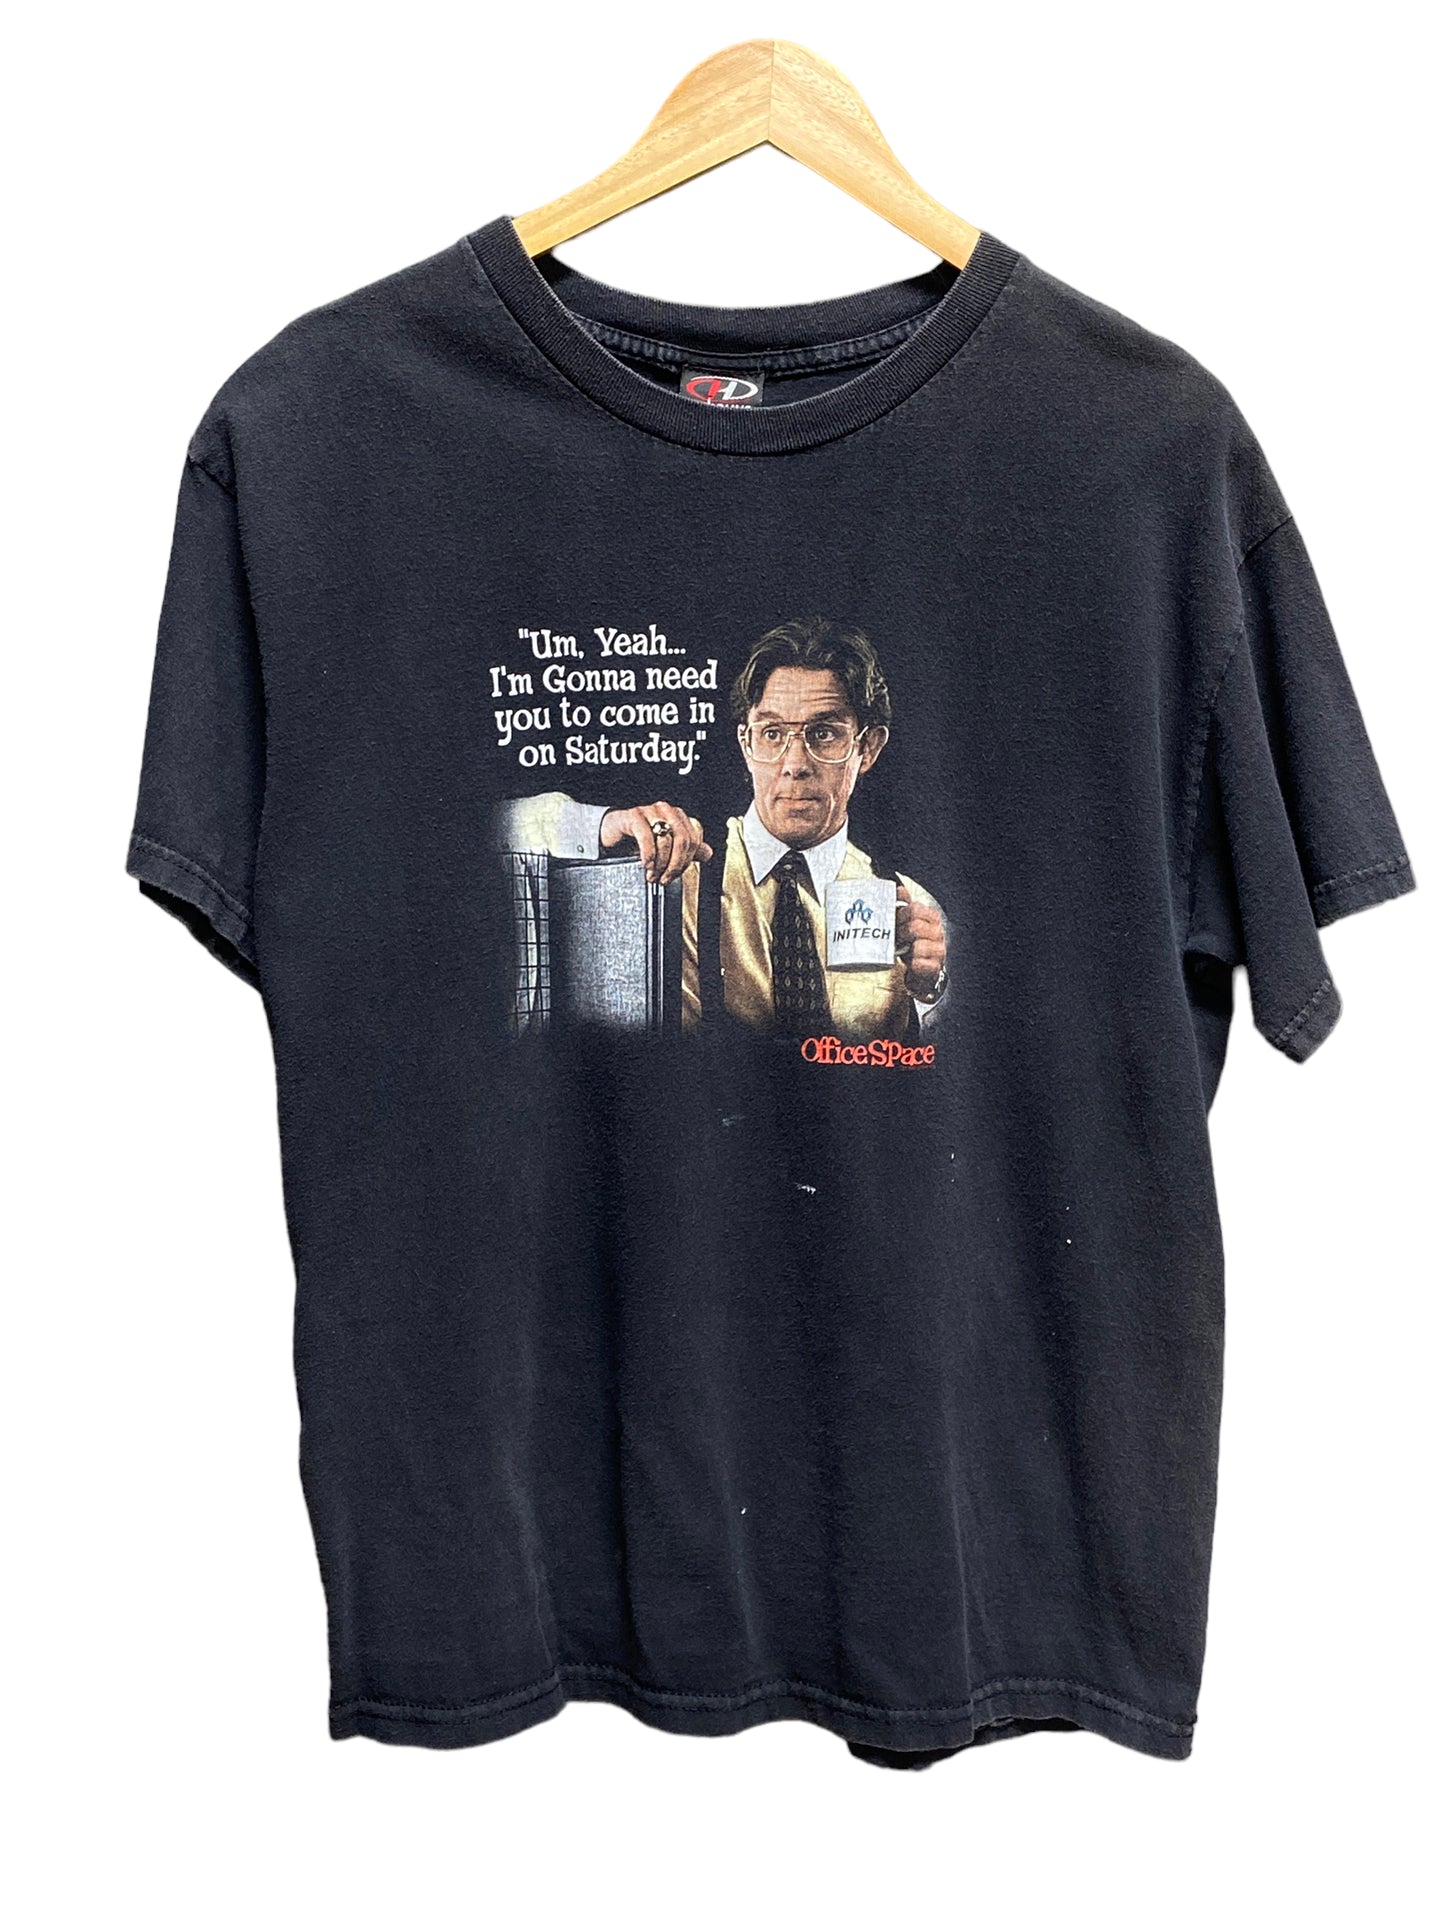 Vintage 00's Office Space Lumberg Come in on Saturday Tee Size Large